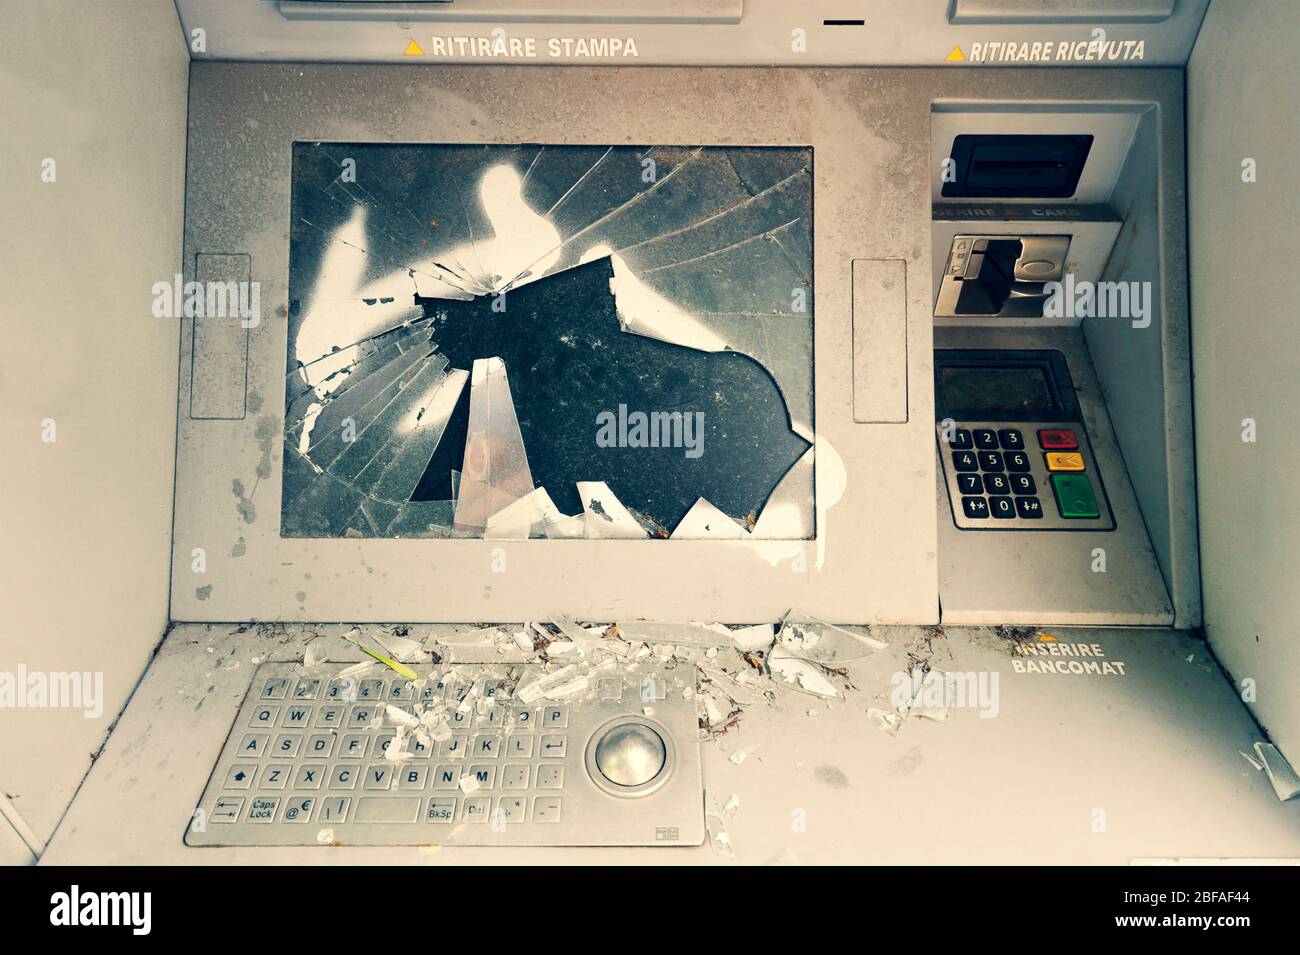 Damaged, vandalised, abandoned ghost ATM, out of order destroyed cash machine. Front view of broken, out of service auto teller machine with cracked s Stock Photo